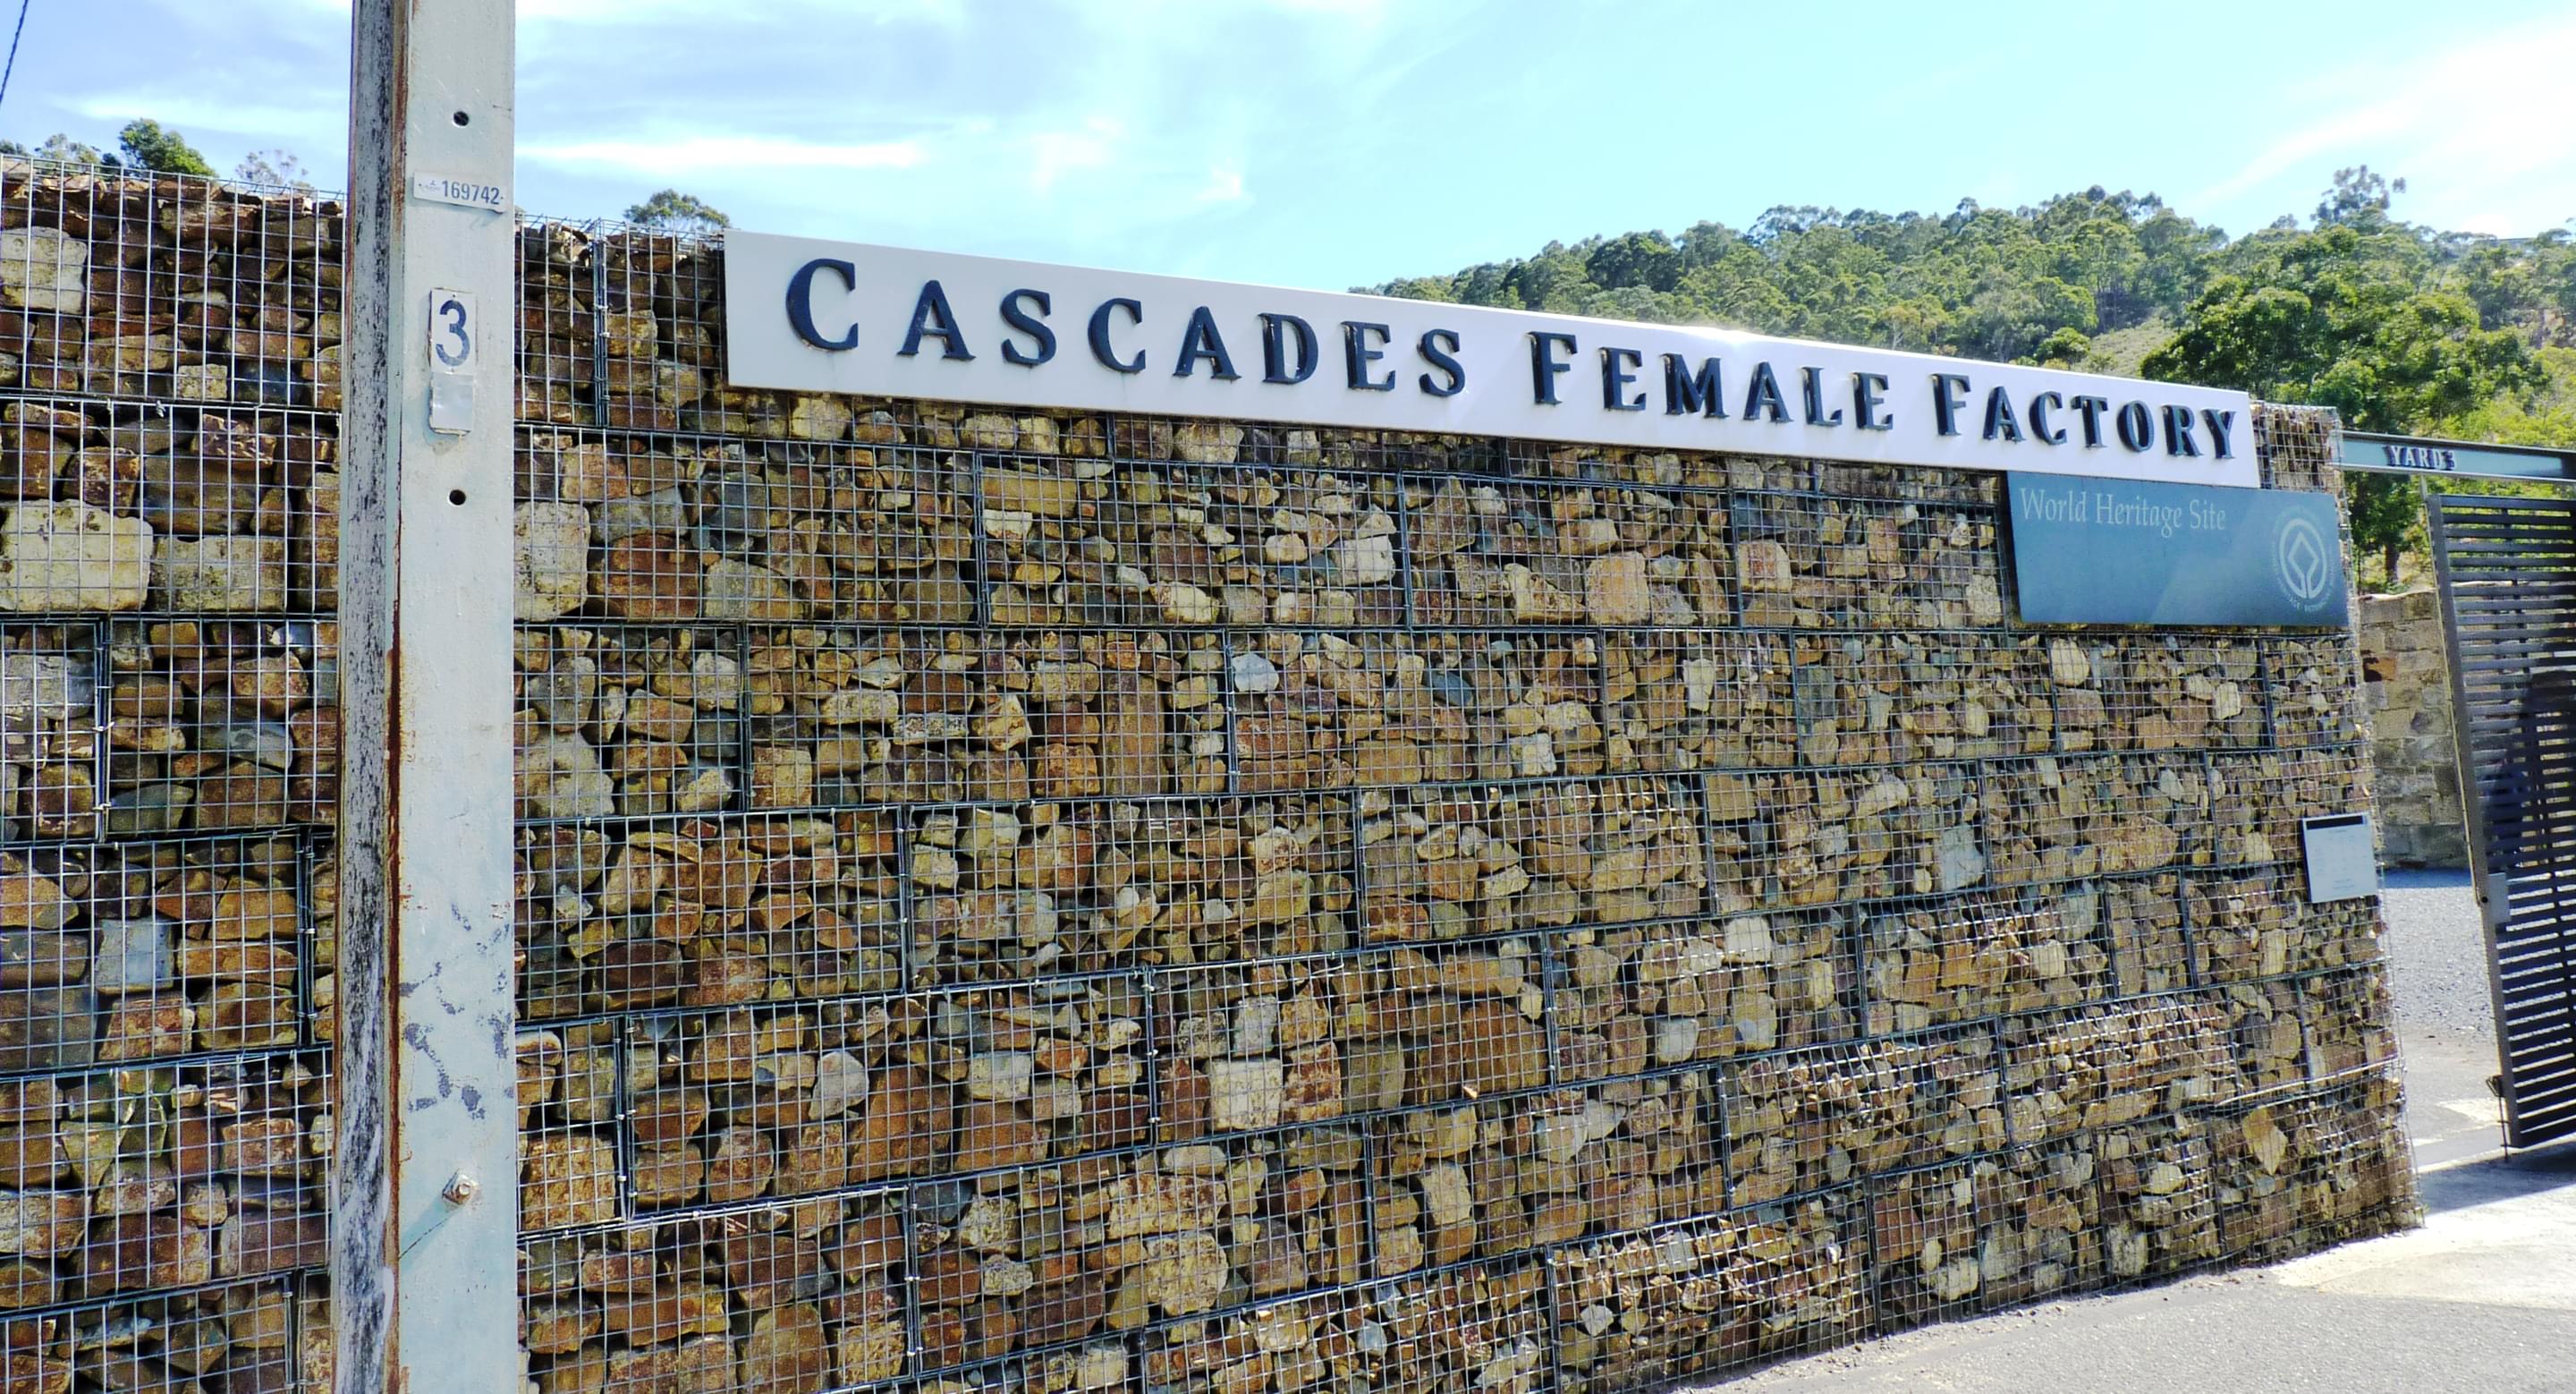 Cascades Female Factory Historic Site Overview